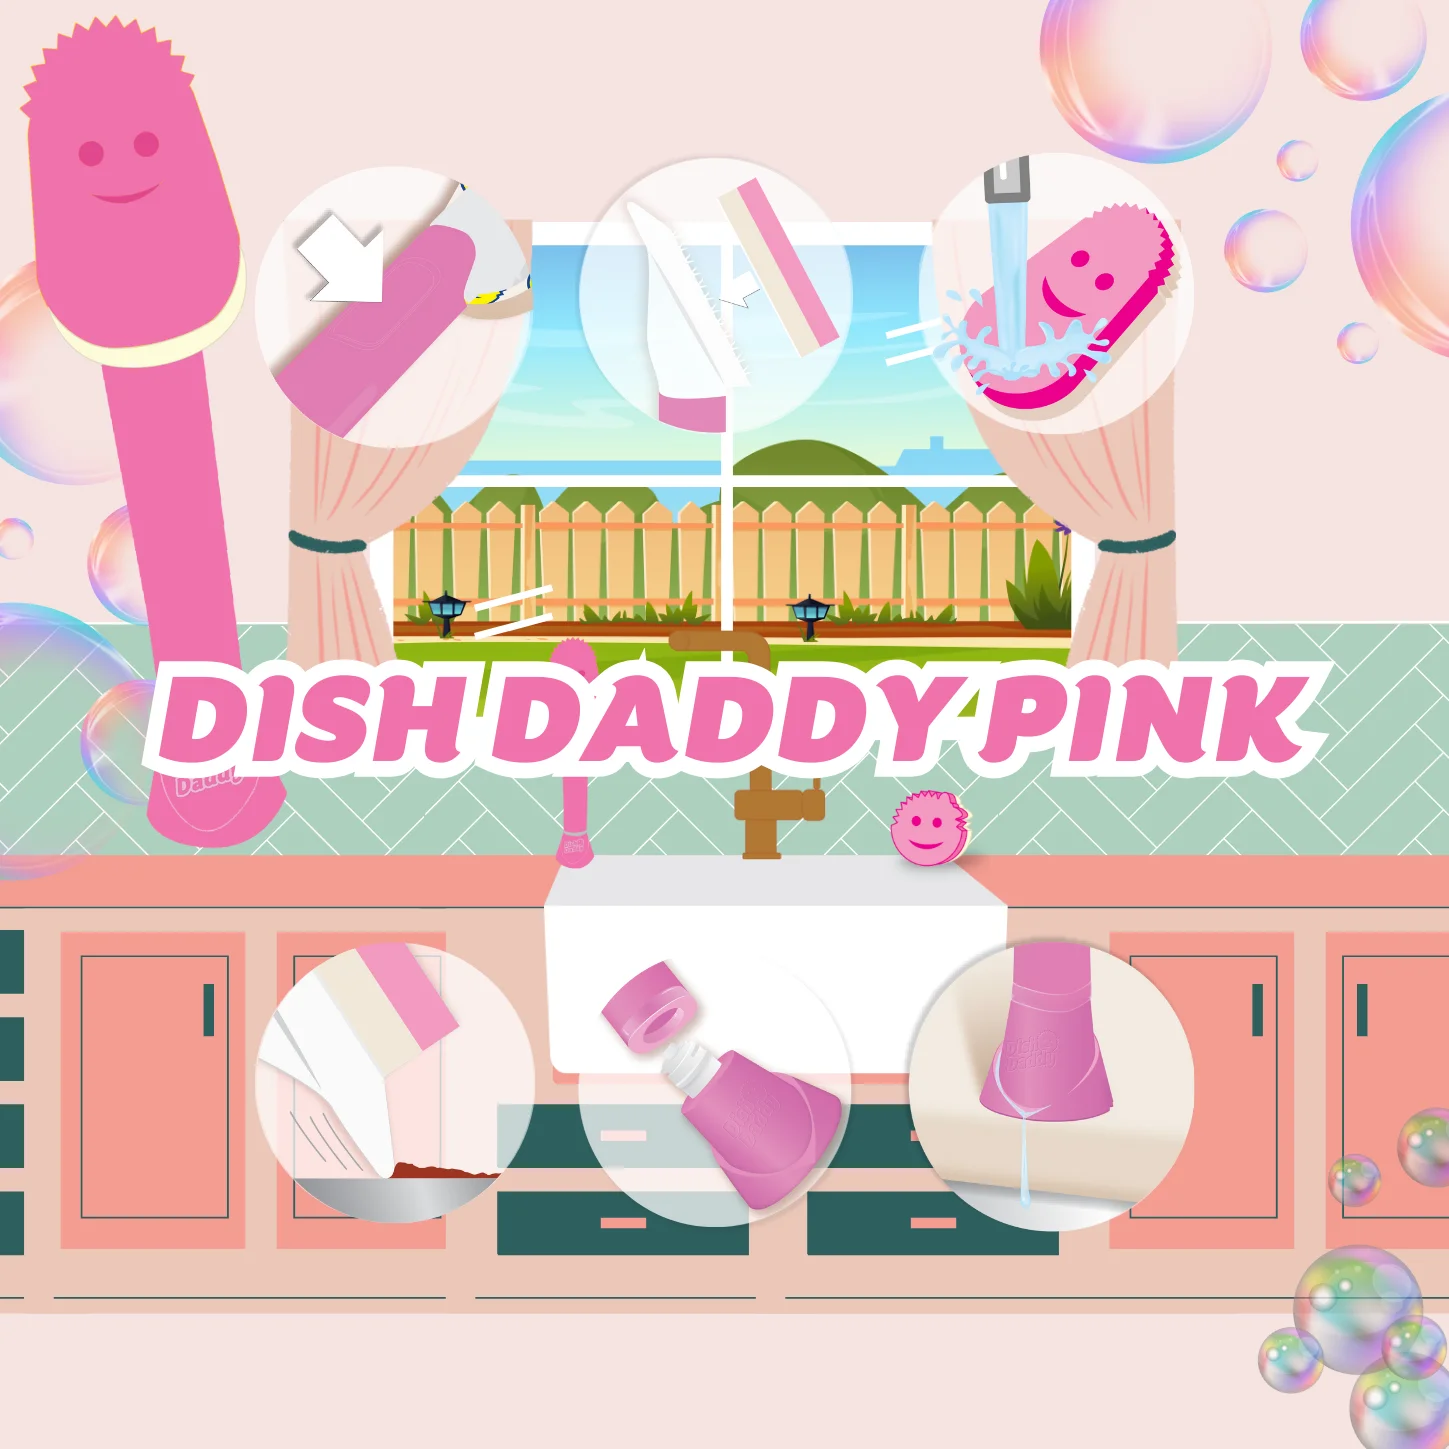 https://scrubdaddy.co.uk/wp-content/uploads/2023/11/Dish-Daddy-Pink-1449-x-1449-px.png.webp